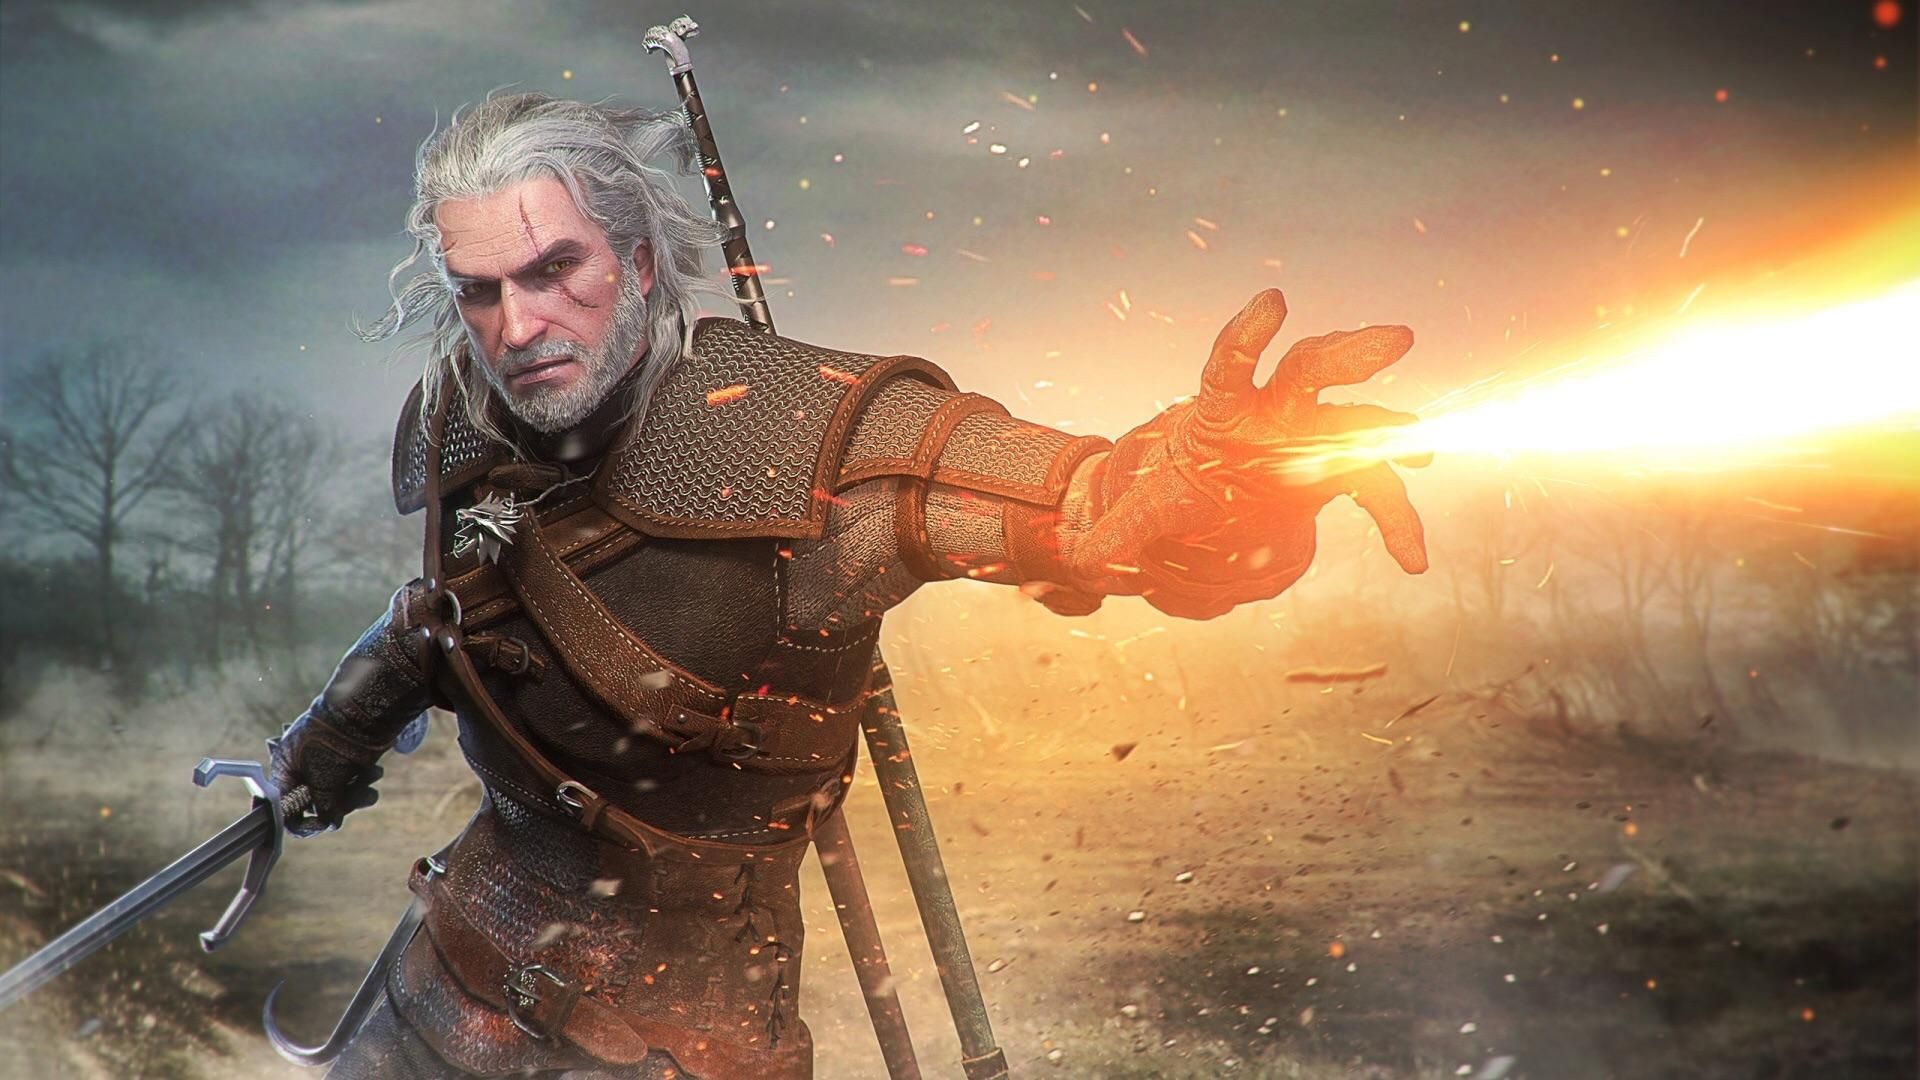 The Witchers Geralt May Be SoulCalibur 6s Guest Character